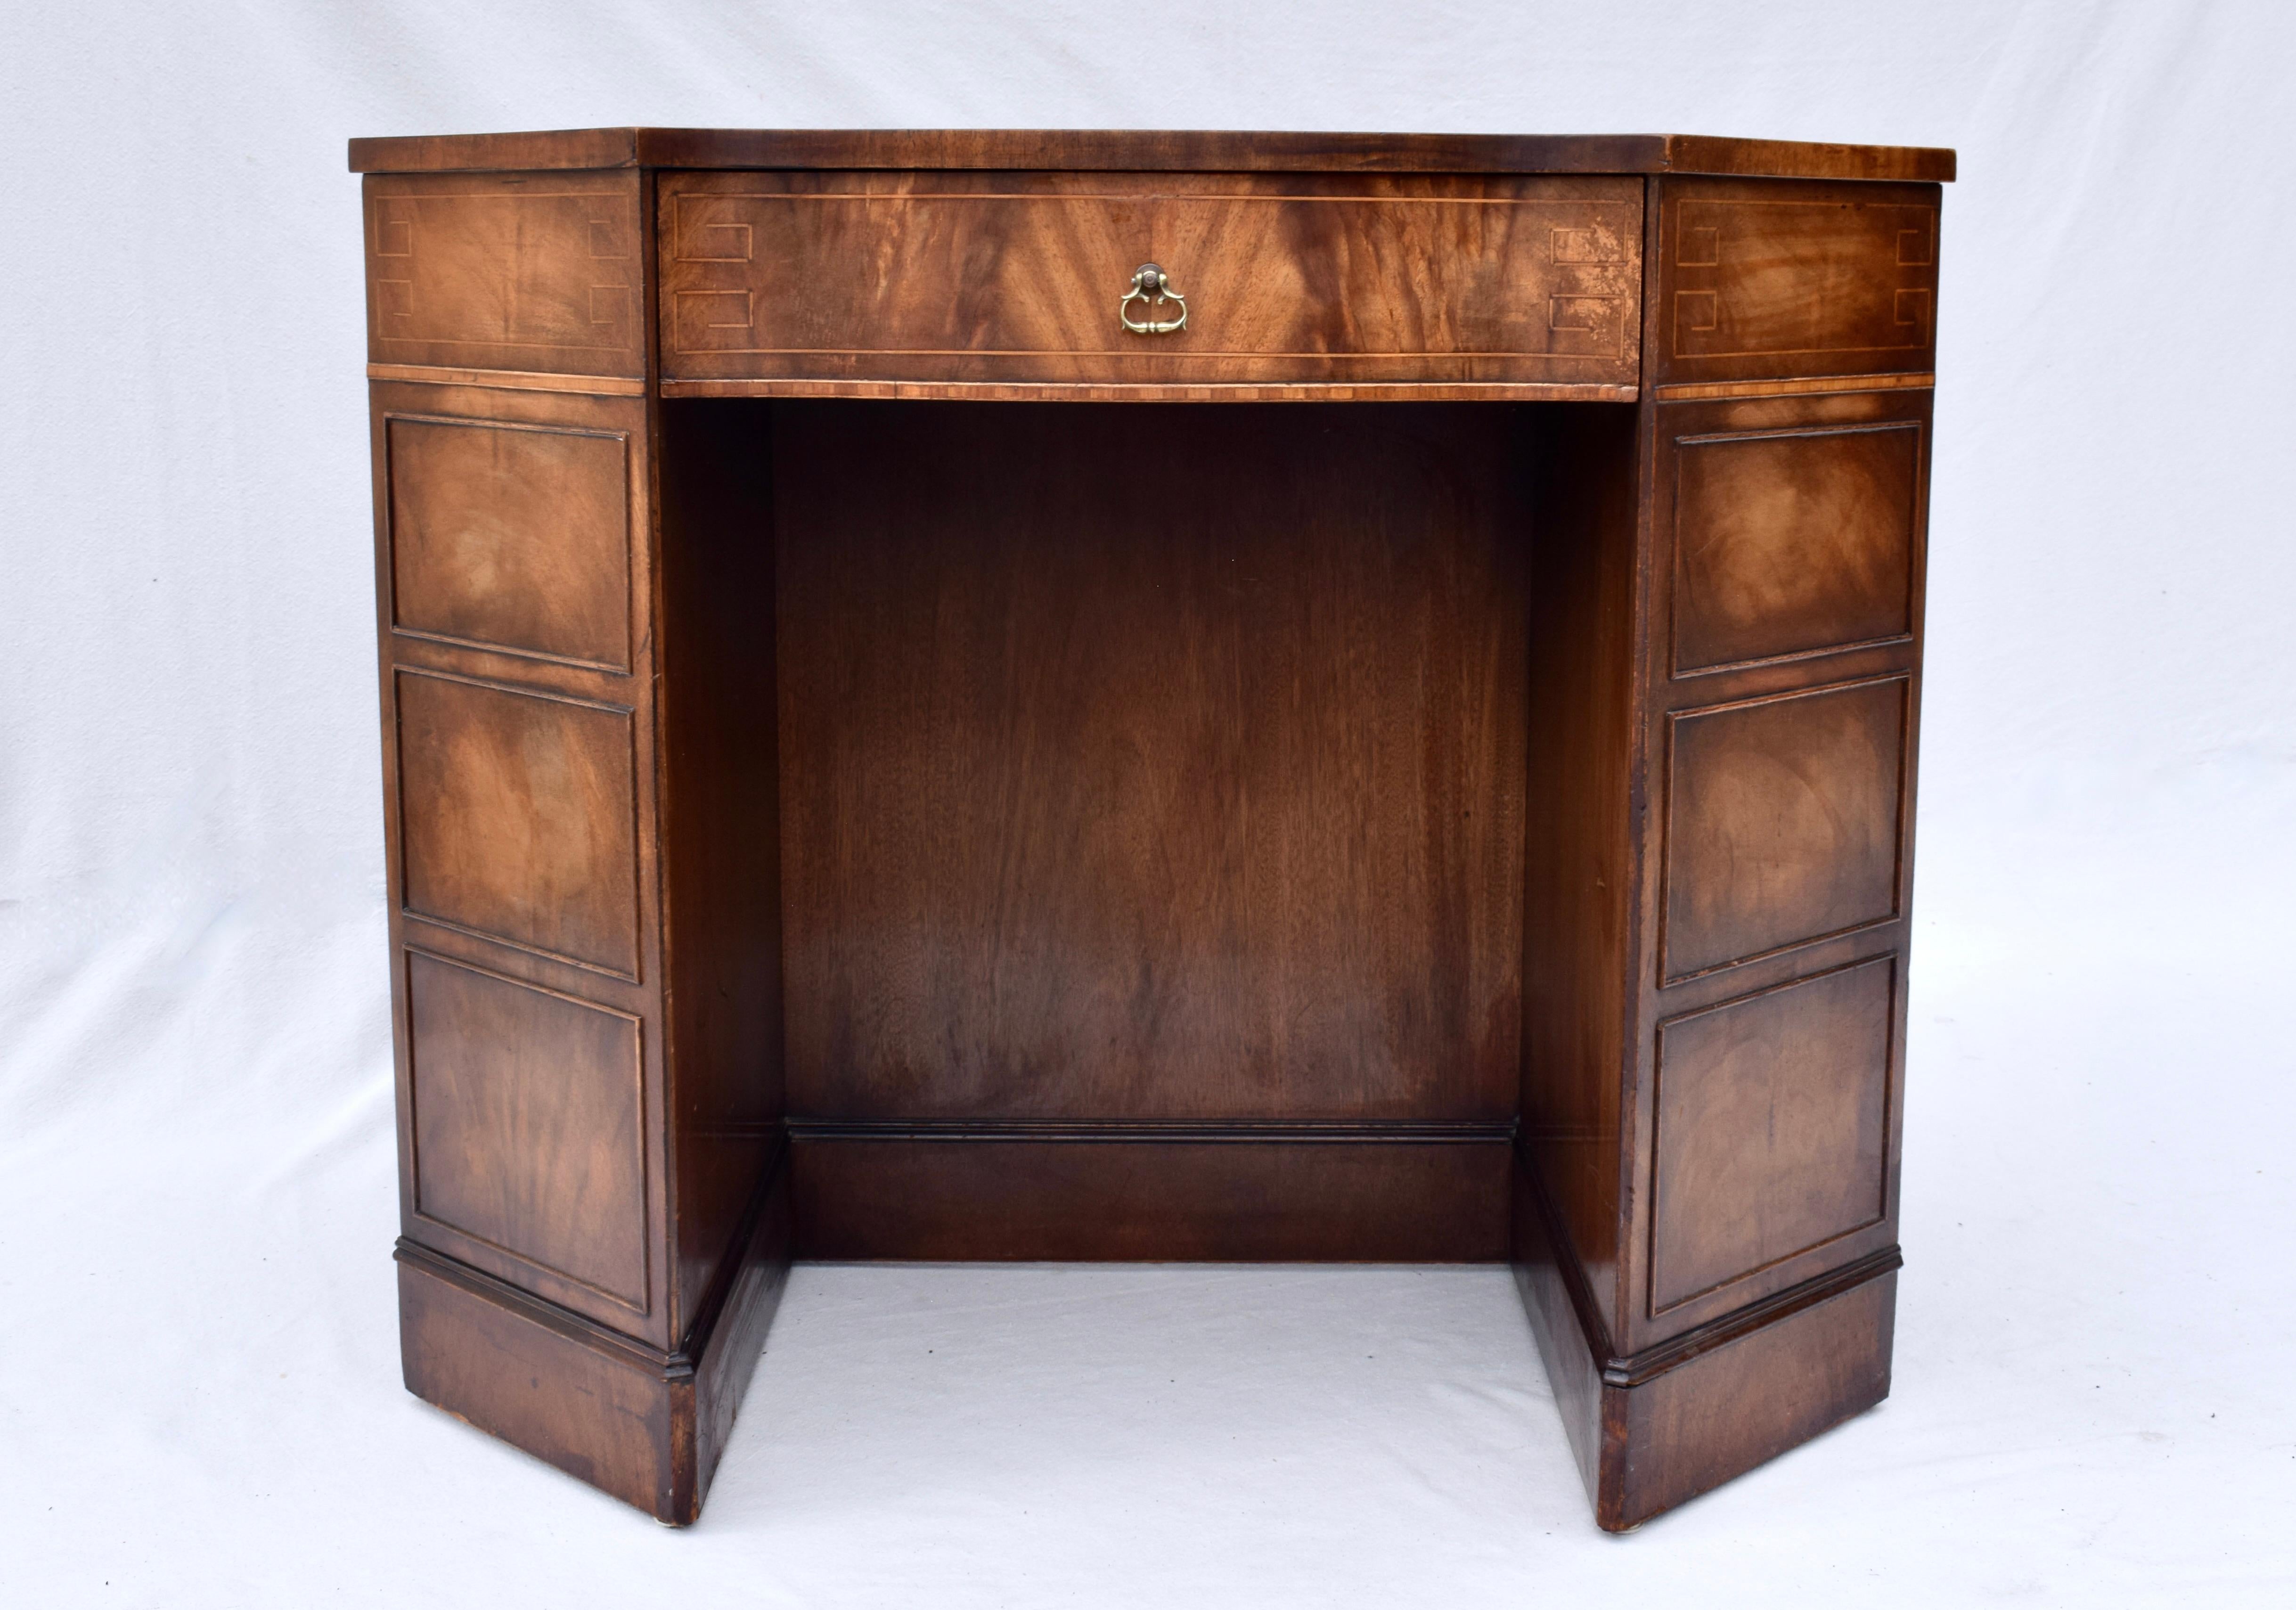 Unusual book matched flame Mahogany partners desk with tooled leather top & inlay details throughout in the Gerogian style. Generous sized dovetailed drawers flank each partners side. Consistent with its' unique nature the desk boasts aesthetically